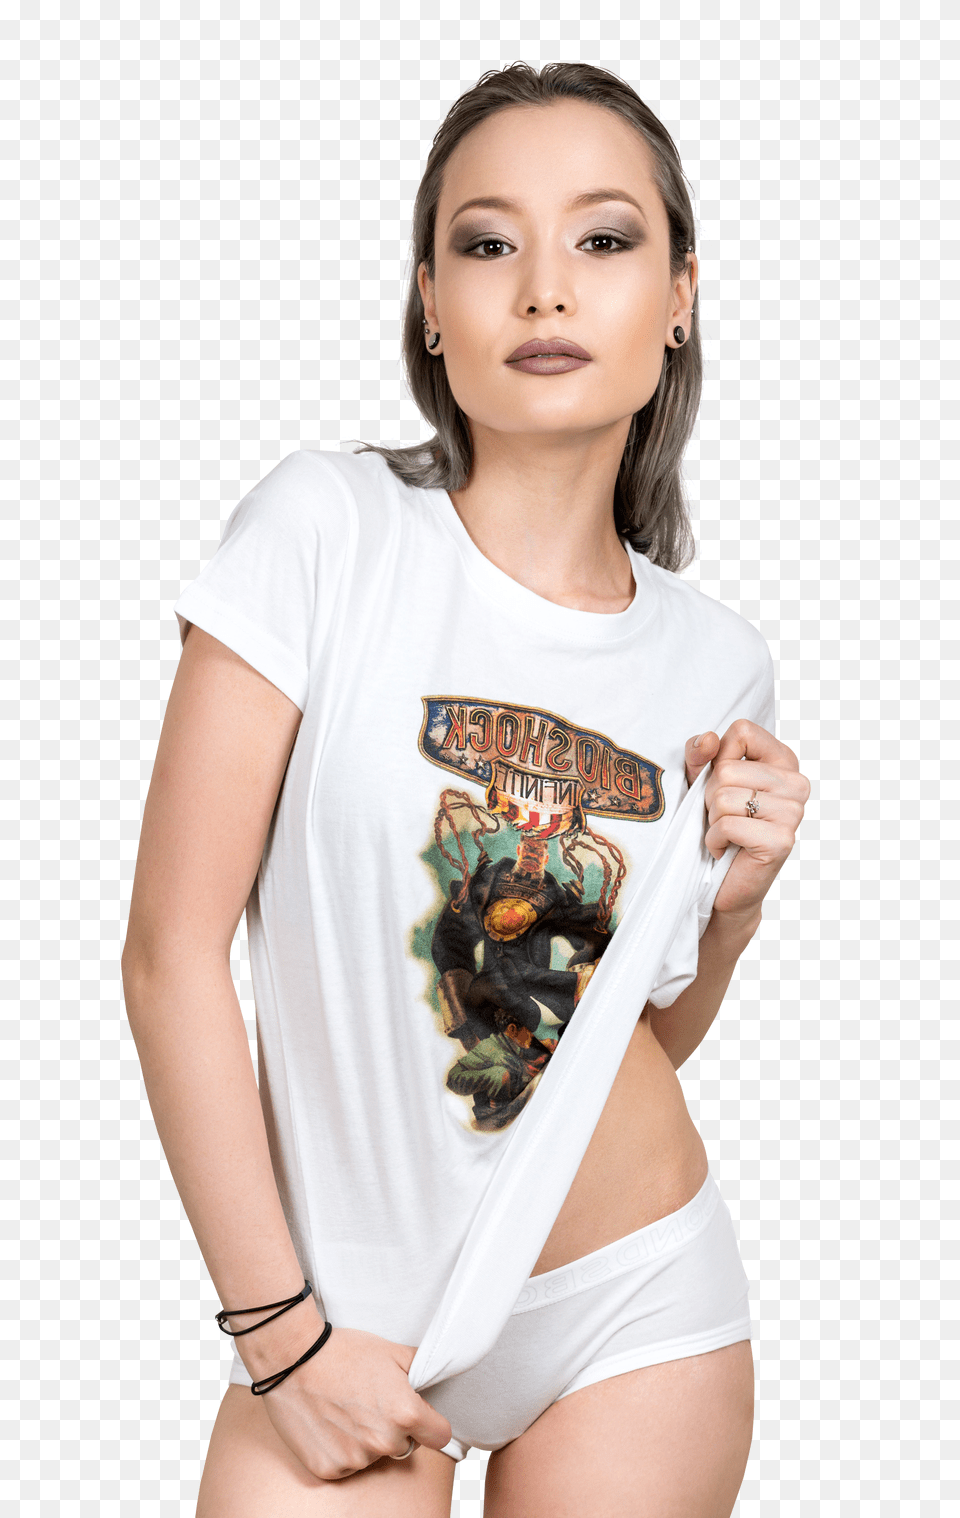 Pngpix Com Beautiful Sexy Young Woman Image, T-shirt, Clothing, Accessories, Person Png